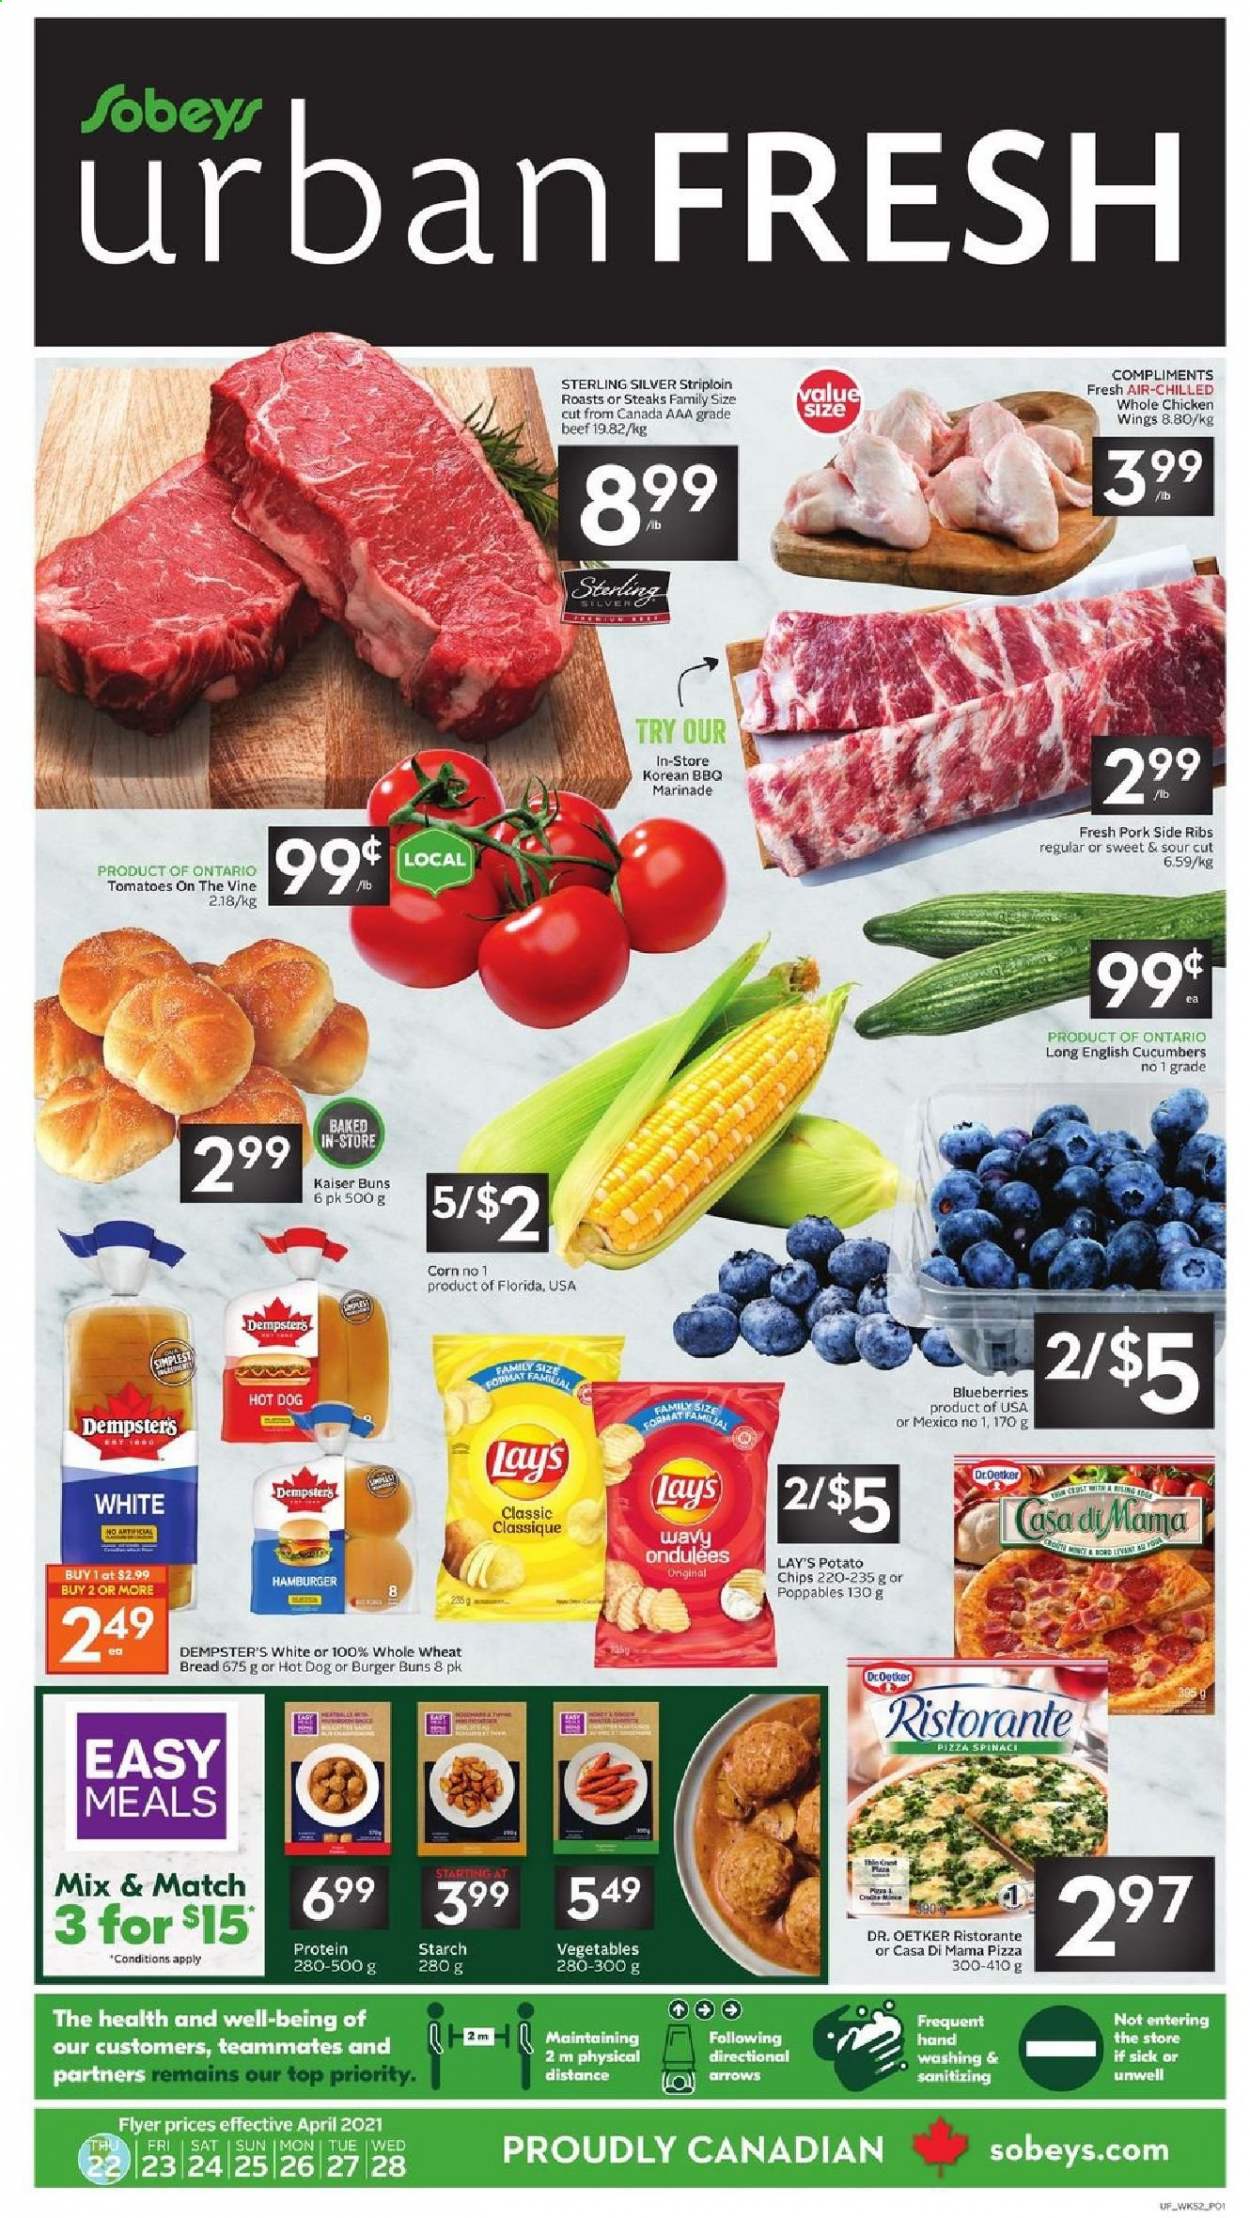 thumbnail - Sobeys Urban Fresh Flyer - April 22, 2021 - April 28, 2021 - Sales products - wheat bread, buns, burger buns, corn, cucumber, blueberries, hot dog, pizza, Dr. Oetker, chicken wings, Lay’s, starch, marinade, whole chicken, chicken, chips, steak. Page 1.